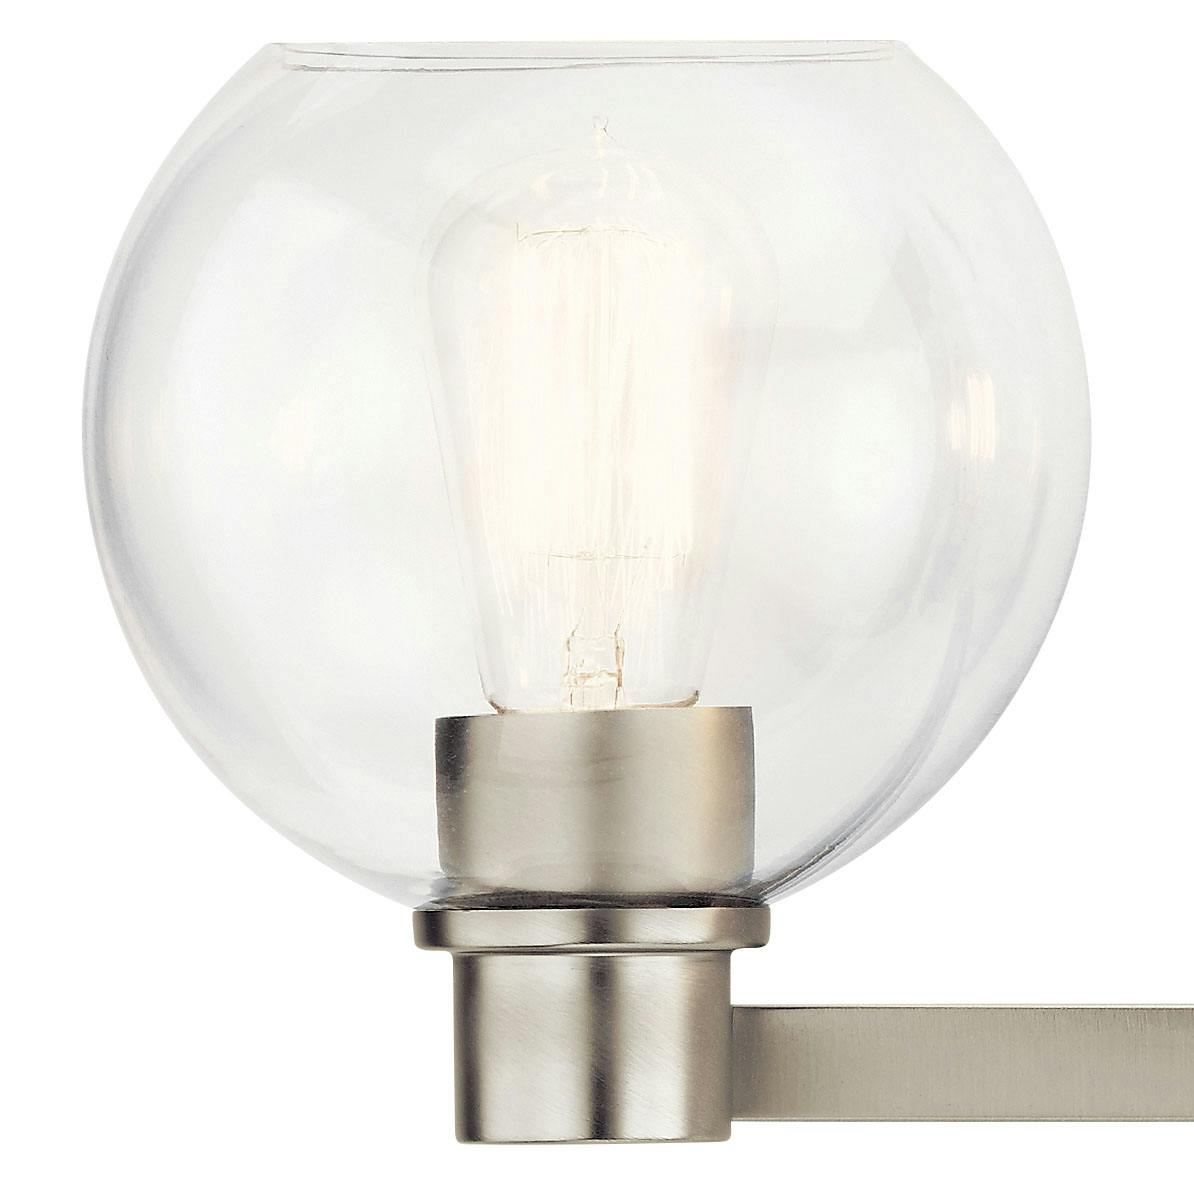 Close up view of the Harmony 4 Light Vanity Light Nickel on a white background